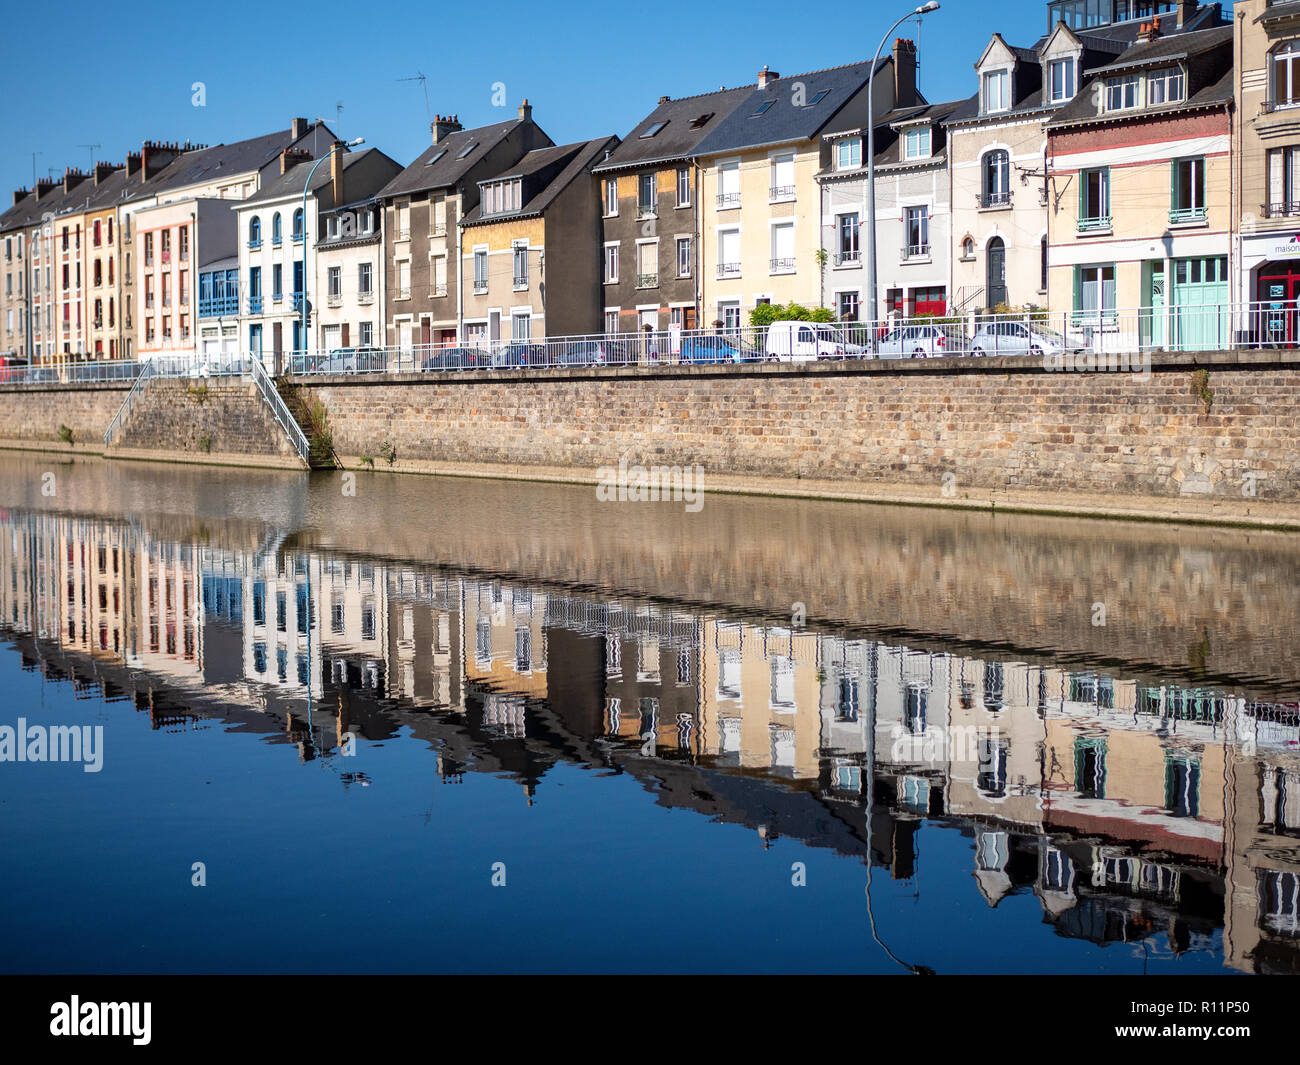 Buildings are reflected on the Sarthe River in the city of Le Mans in western France. Le Mans is an important city in the Pays de la Loire region. Fil Stock Photo